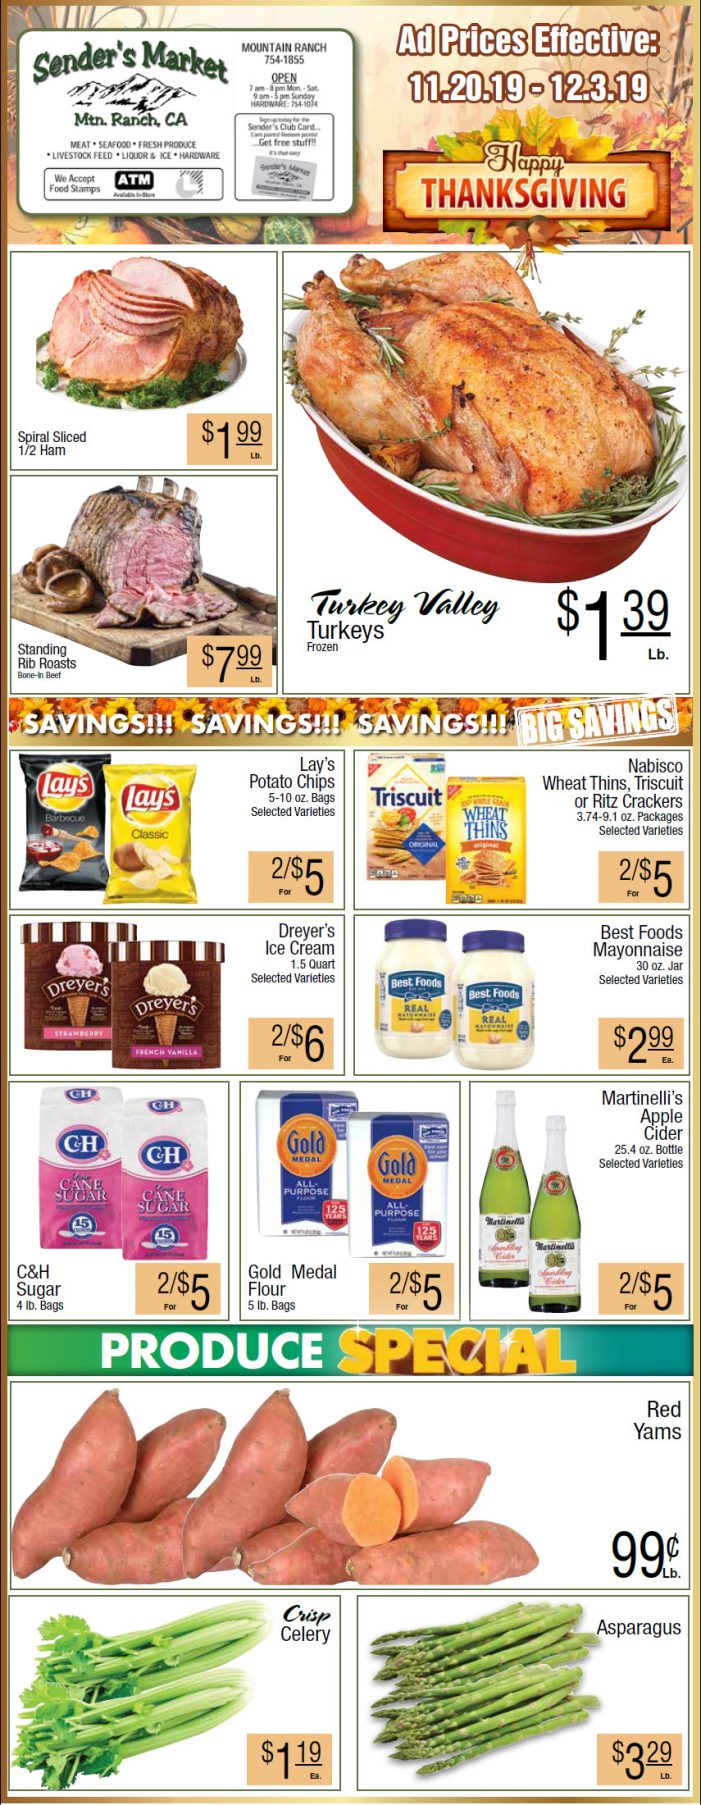 Sender’s Market’s Big Thanksgiving Ad!  Local Grocery Ad & Grocery Specials Through December 3rd!